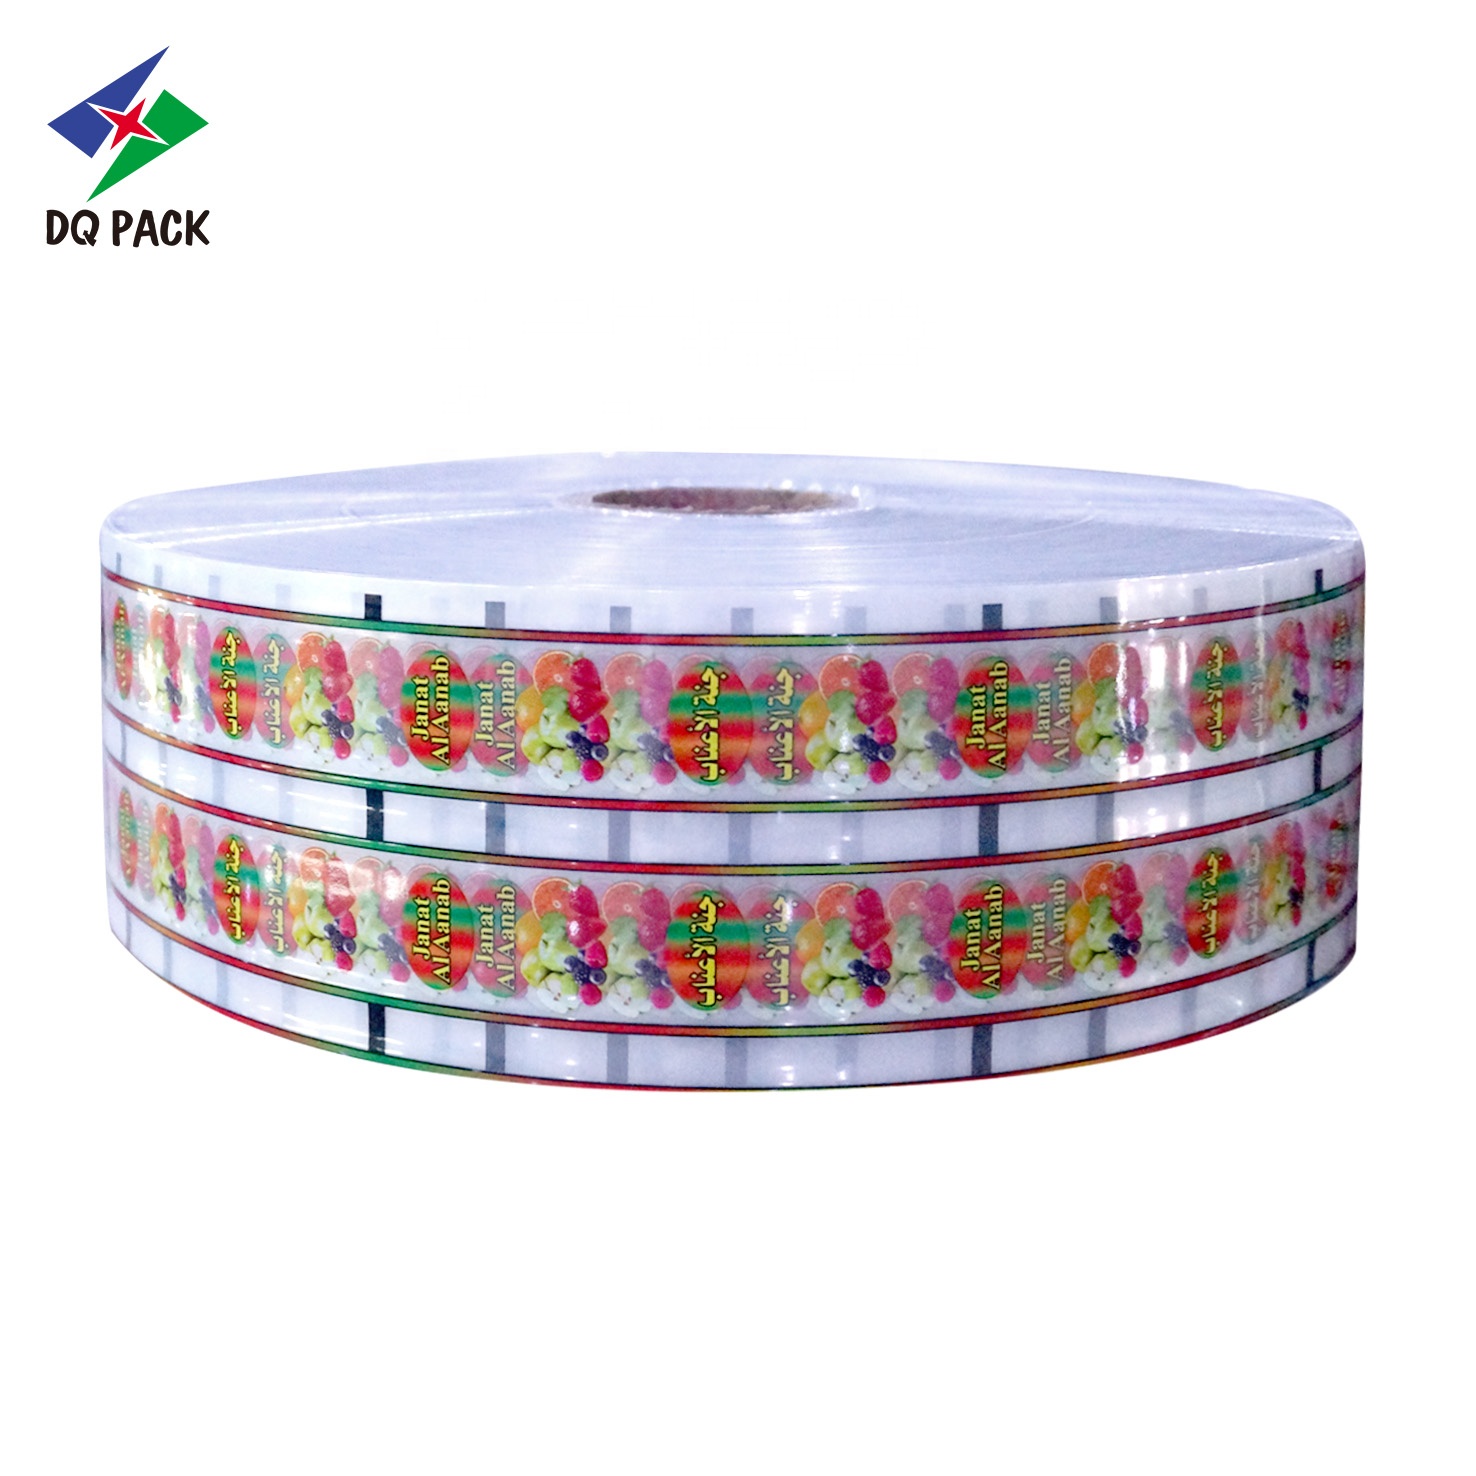 DQ PACK Plastic Packaging Film For Automatic Vertical Packing Pouch Machine Sachet Juice